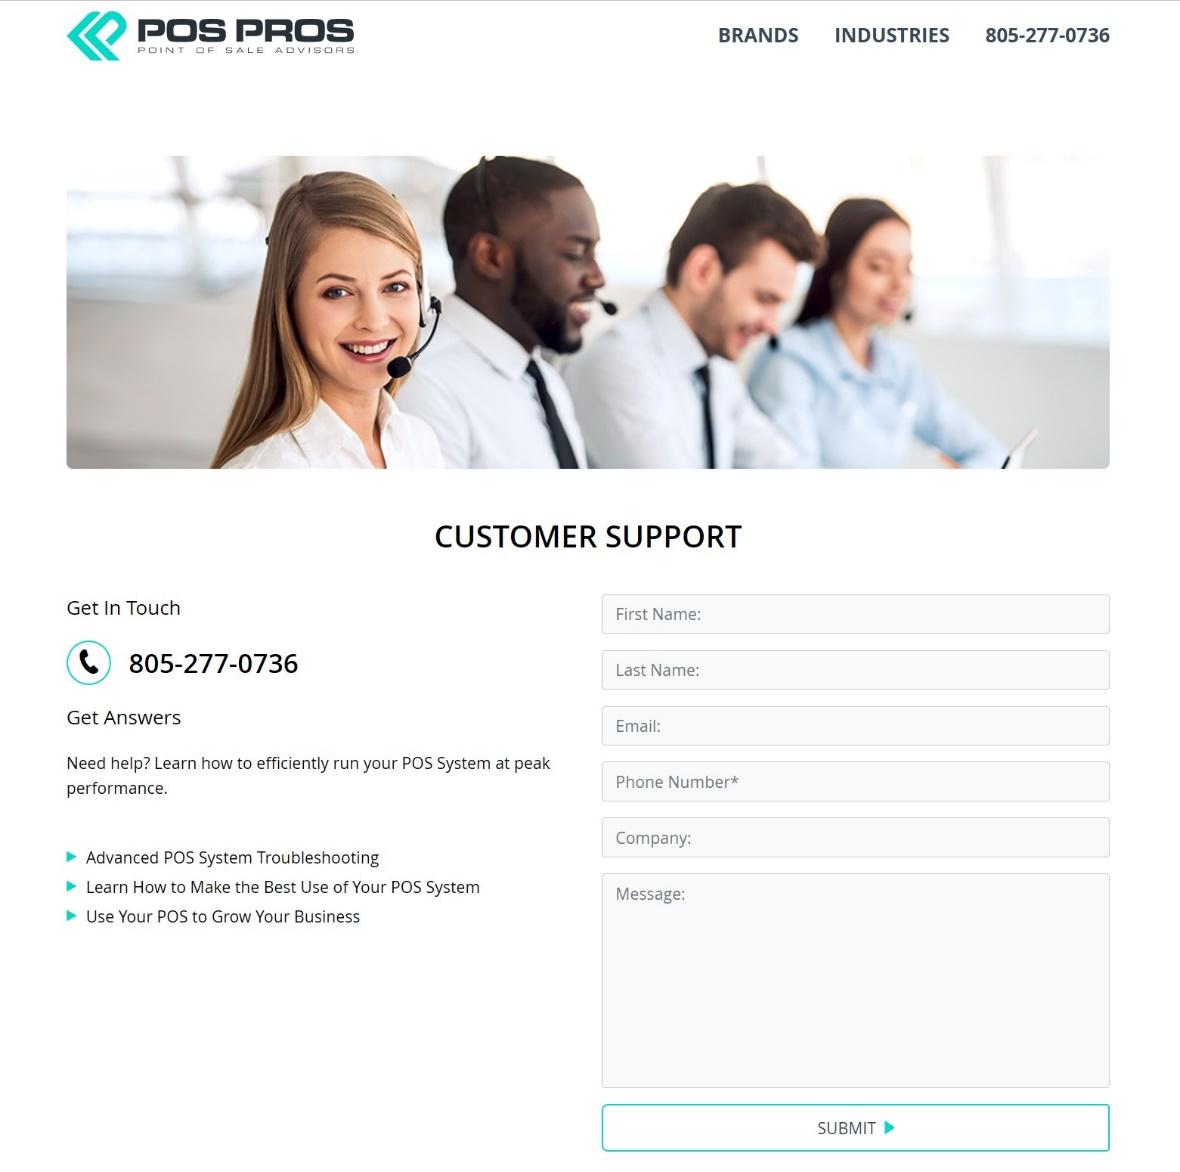 POS Pros customer support email form.